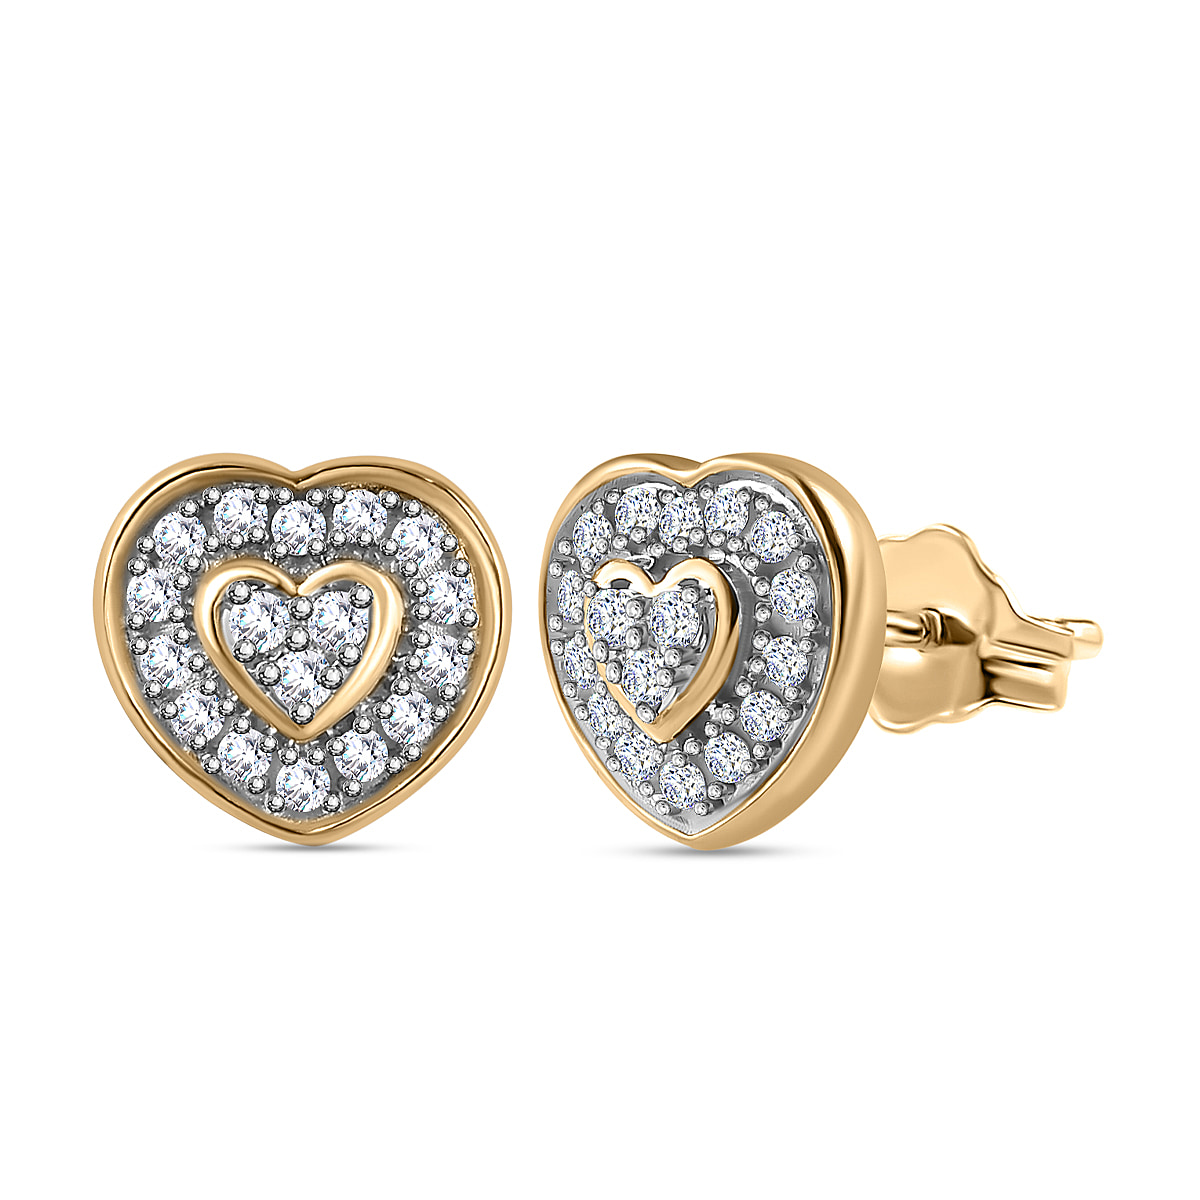 9K Yellow Gold  I3   White Diamond  I3 Solitaire Stud Push Post Earring 0.19 ct,  Gold Wt. 1.23 Gms  0.190  Ct.